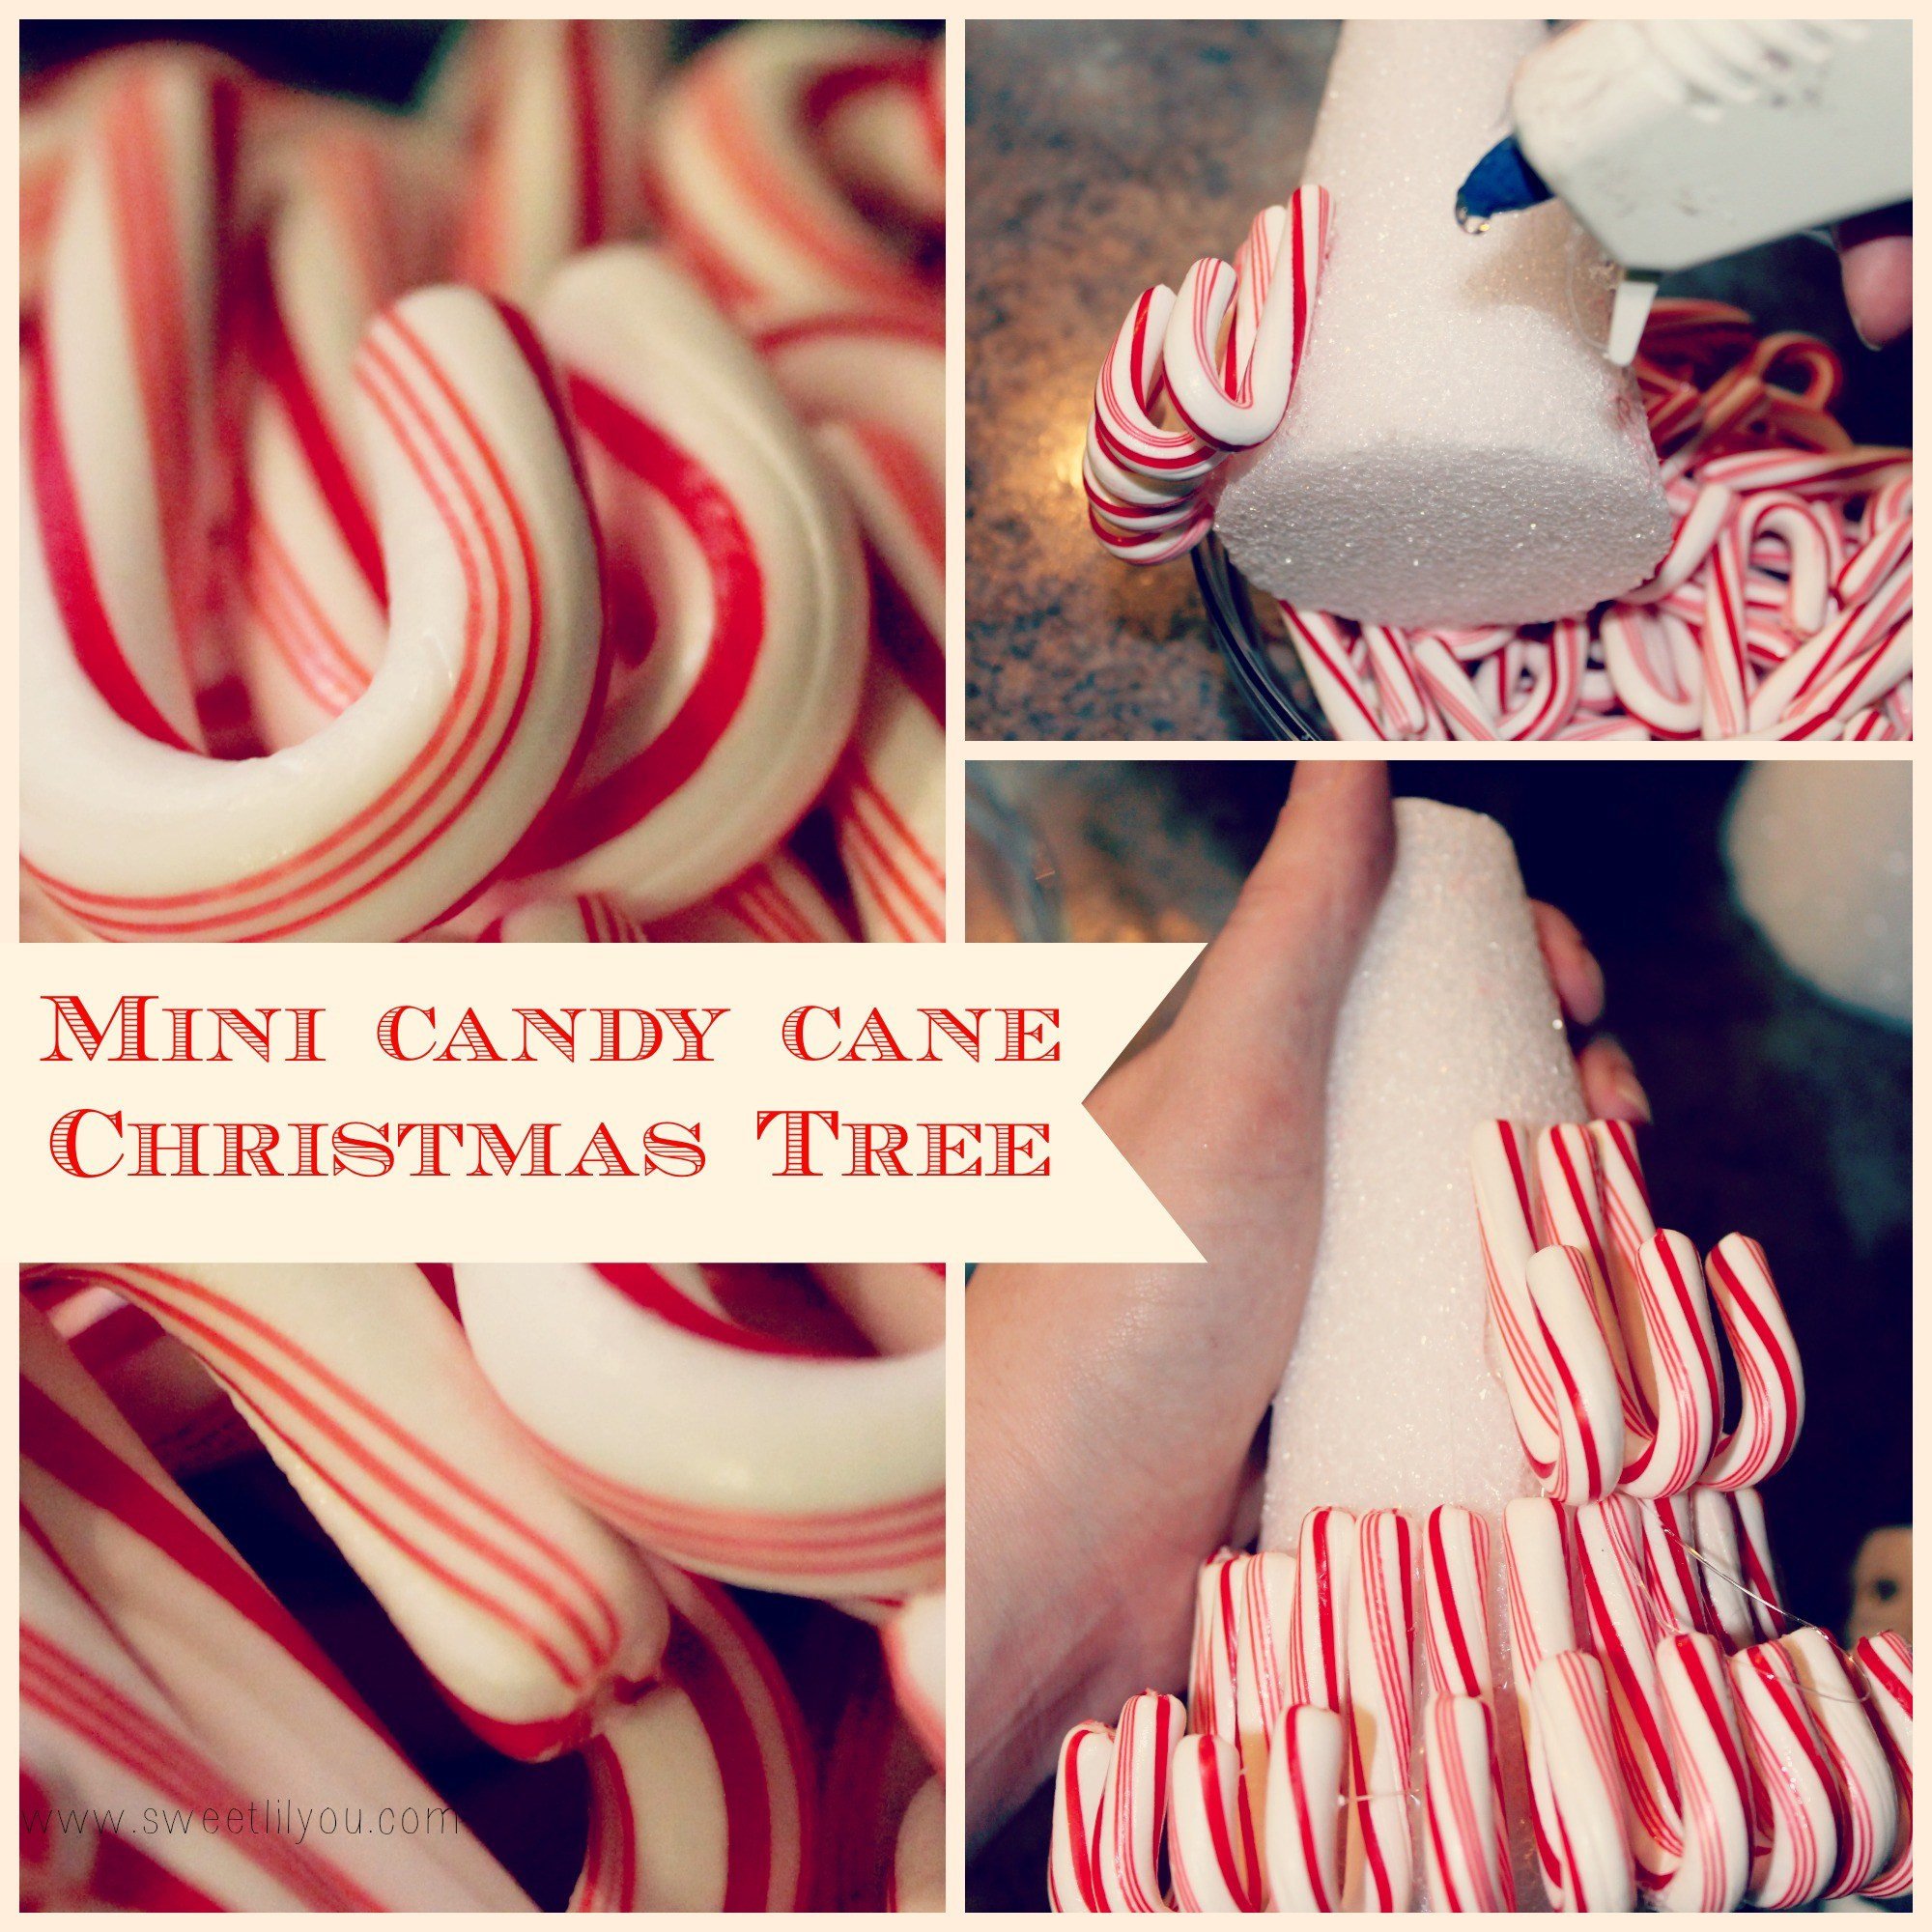 Candy Cane Christmas Shop
 Holiday Entertaining & Decorating with Price Chopper